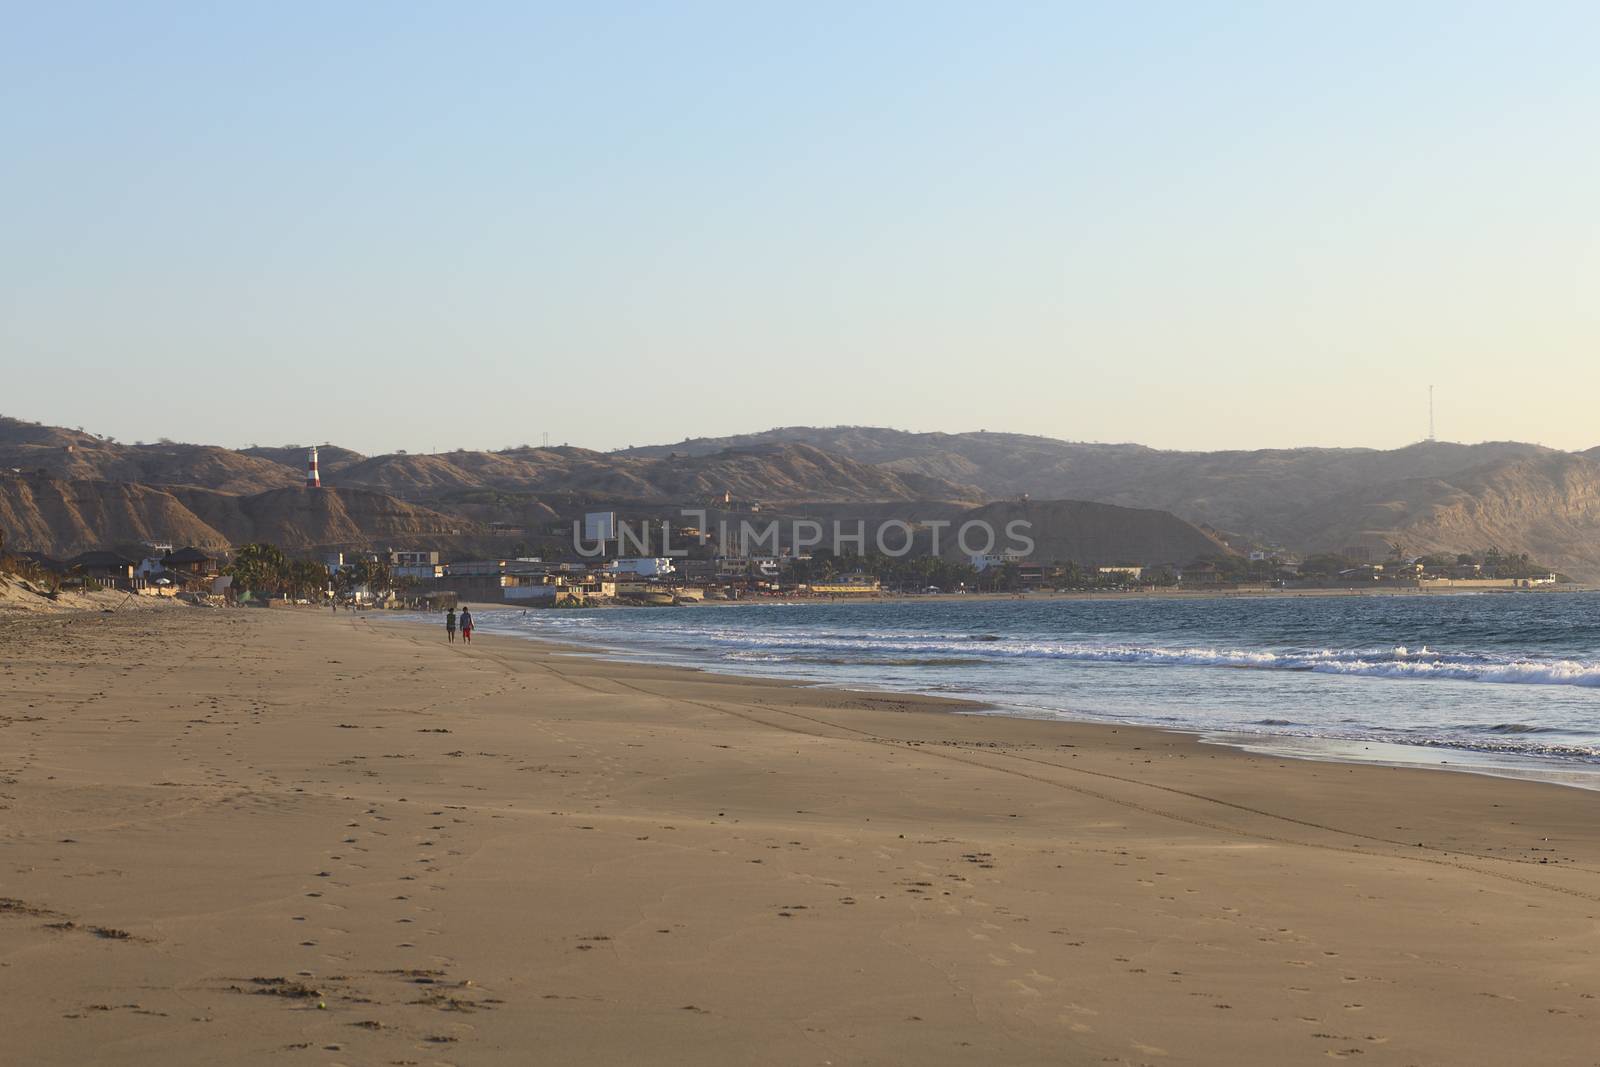 MANCORA, PERU - AUGUST 18, 2013: Unidentified people on the sandy beach with view onto the tourist part of town along the coast on August 18, 2013 in Mancora, Peru. The small town of Mancora is known for its sandy beaches and is popular with Peruvian and foreign tourists. 